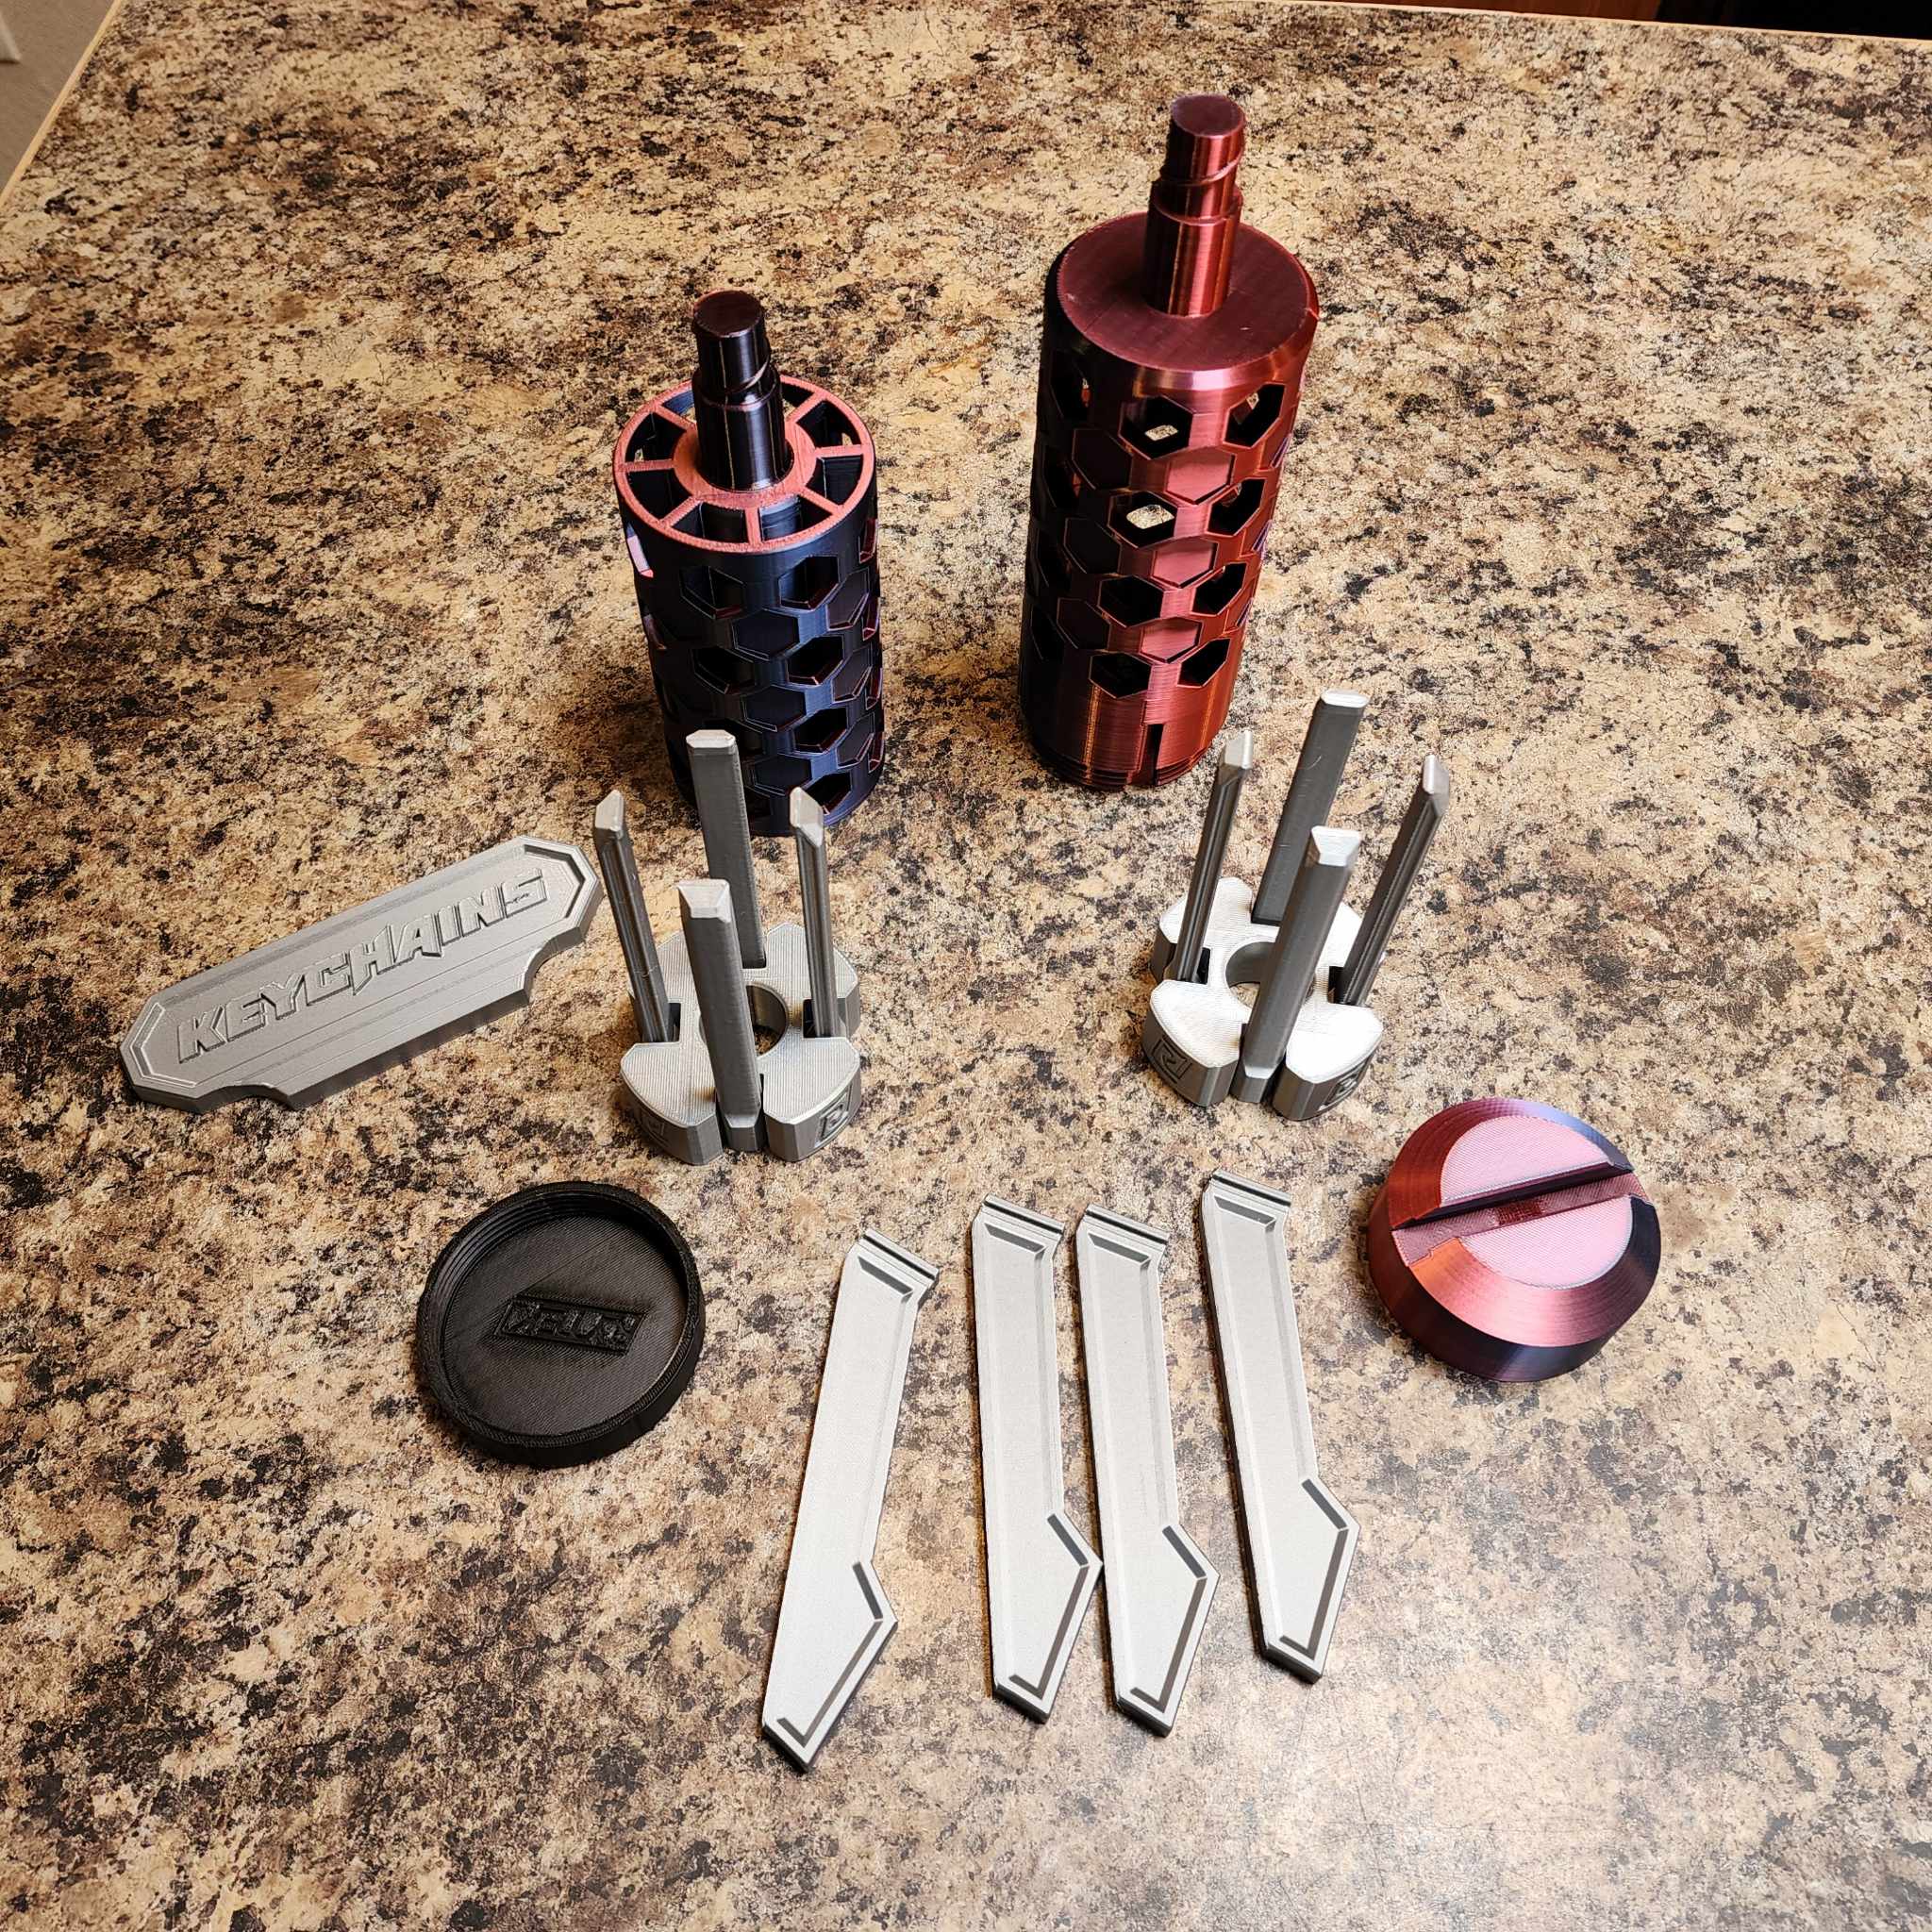 KeyChain Display Stand by MBrMSX - Thingiverse